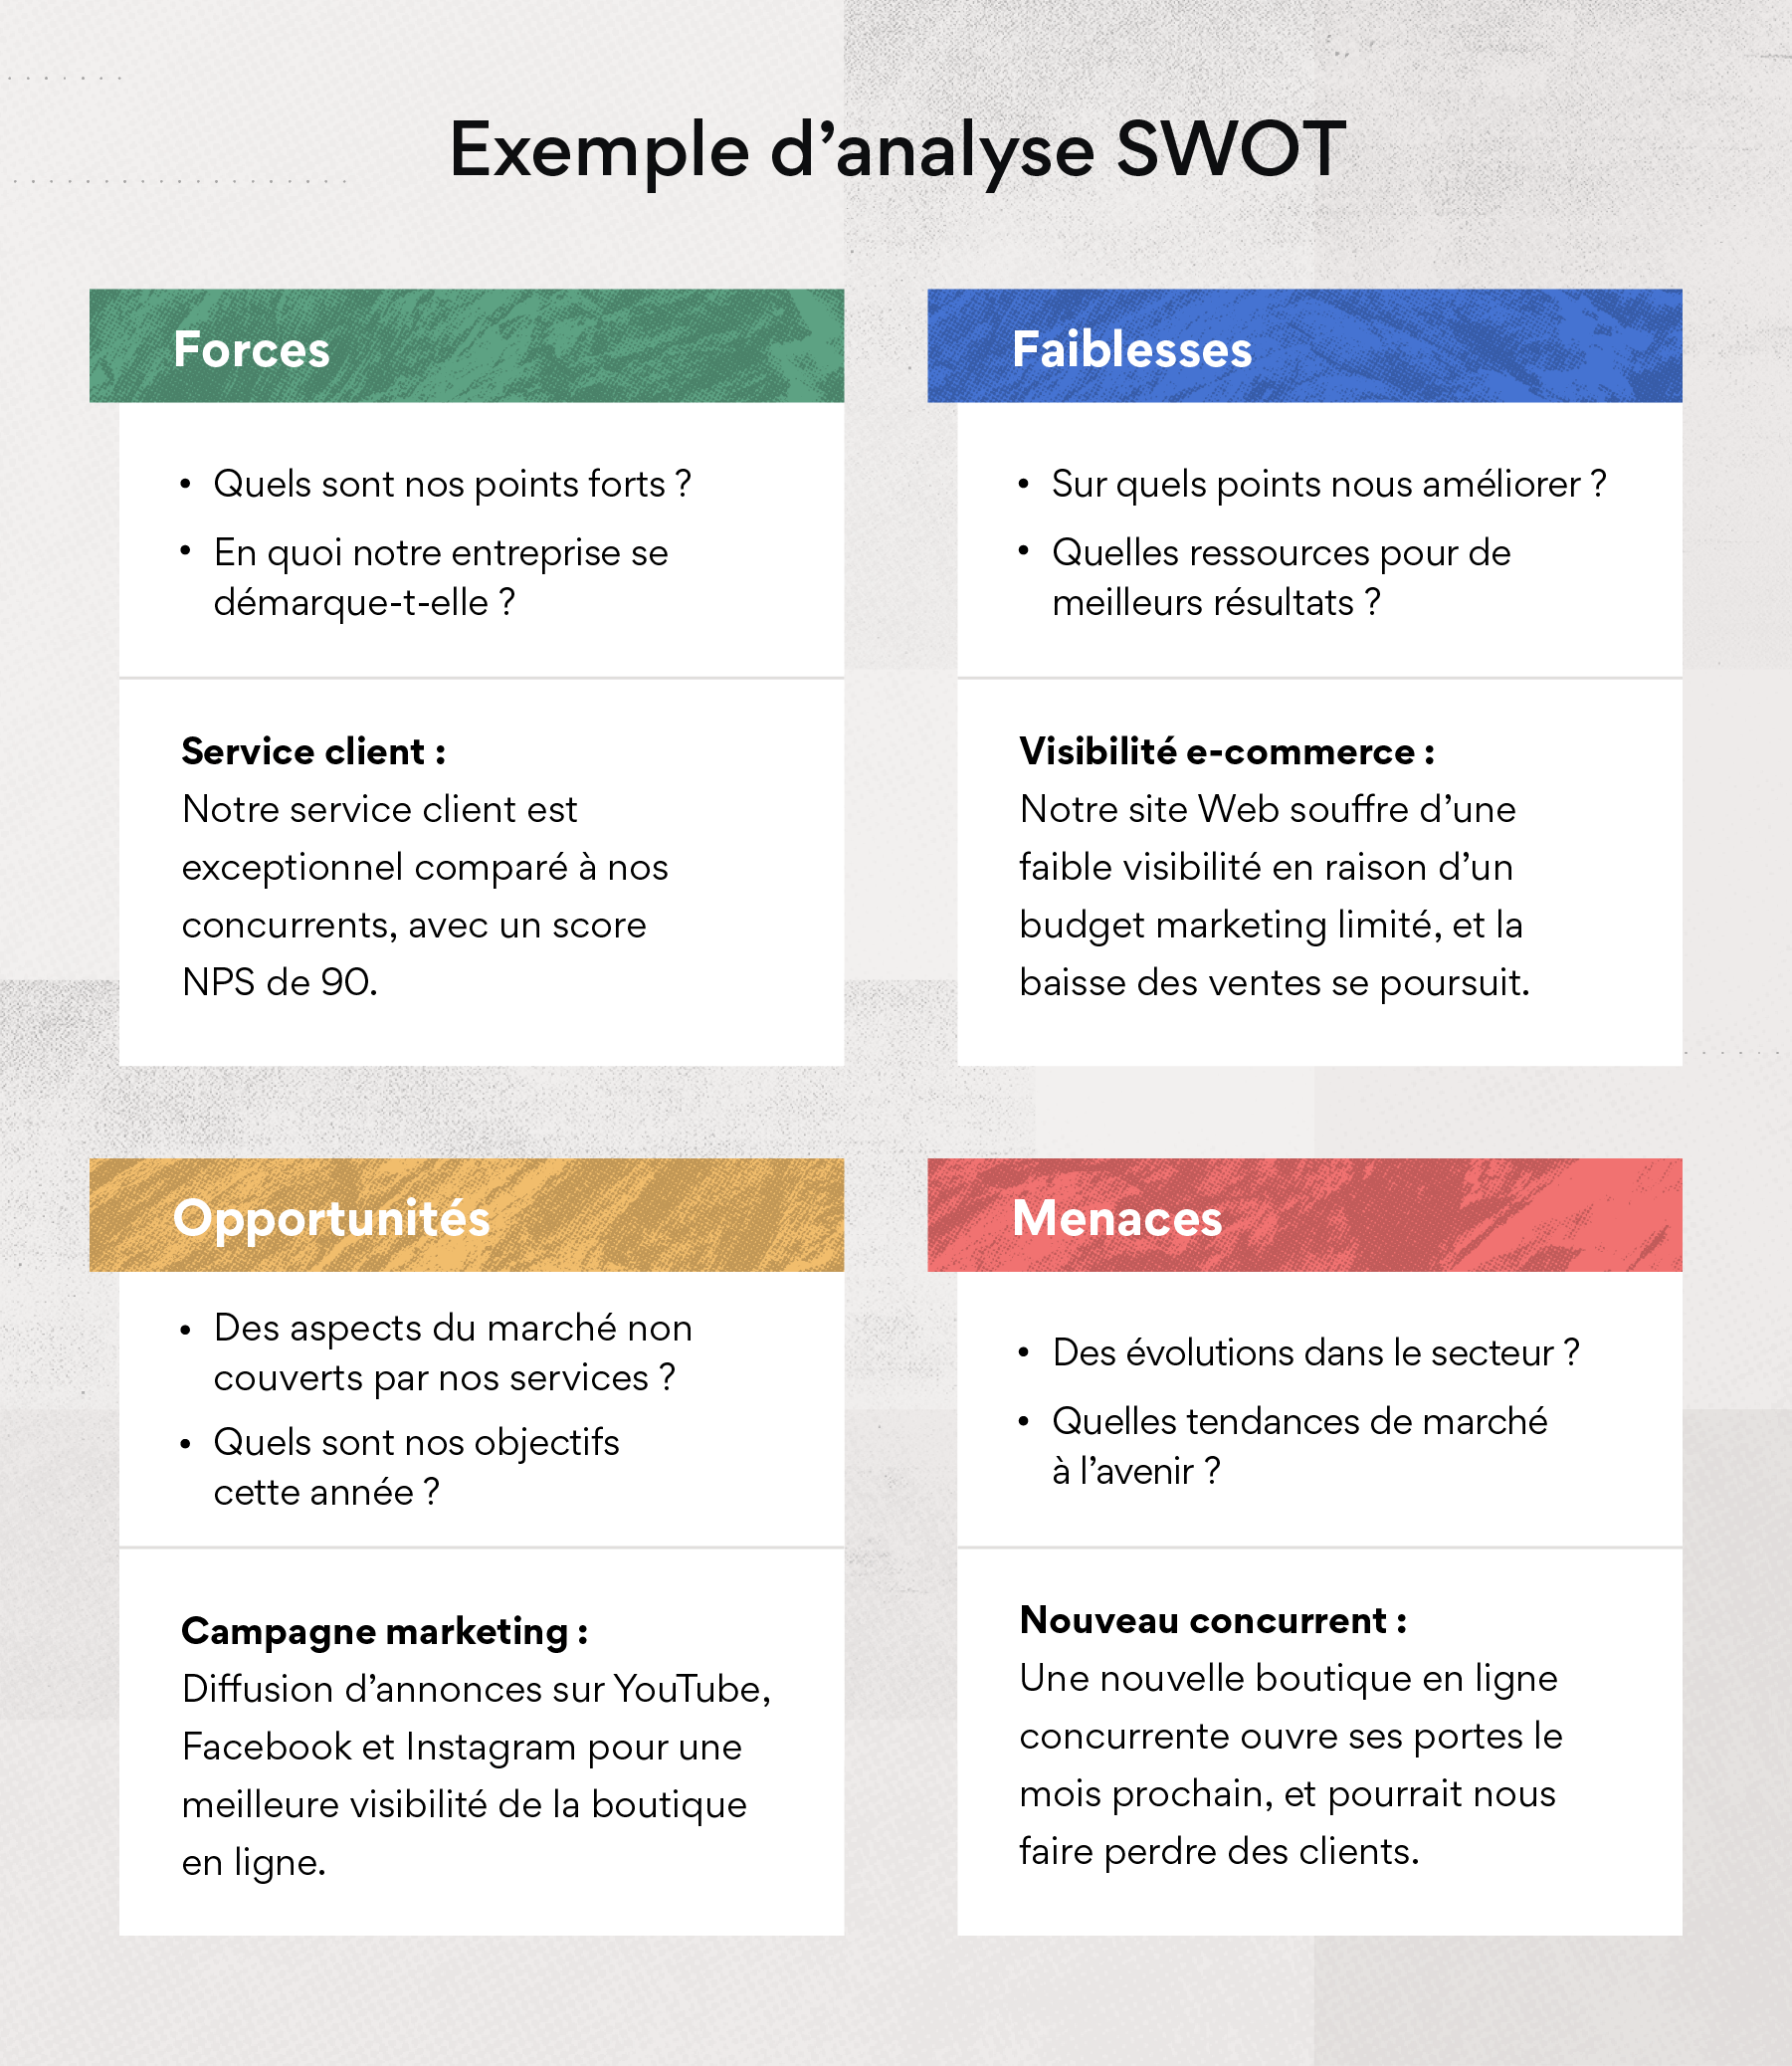 Exemple d’analyse SWOT